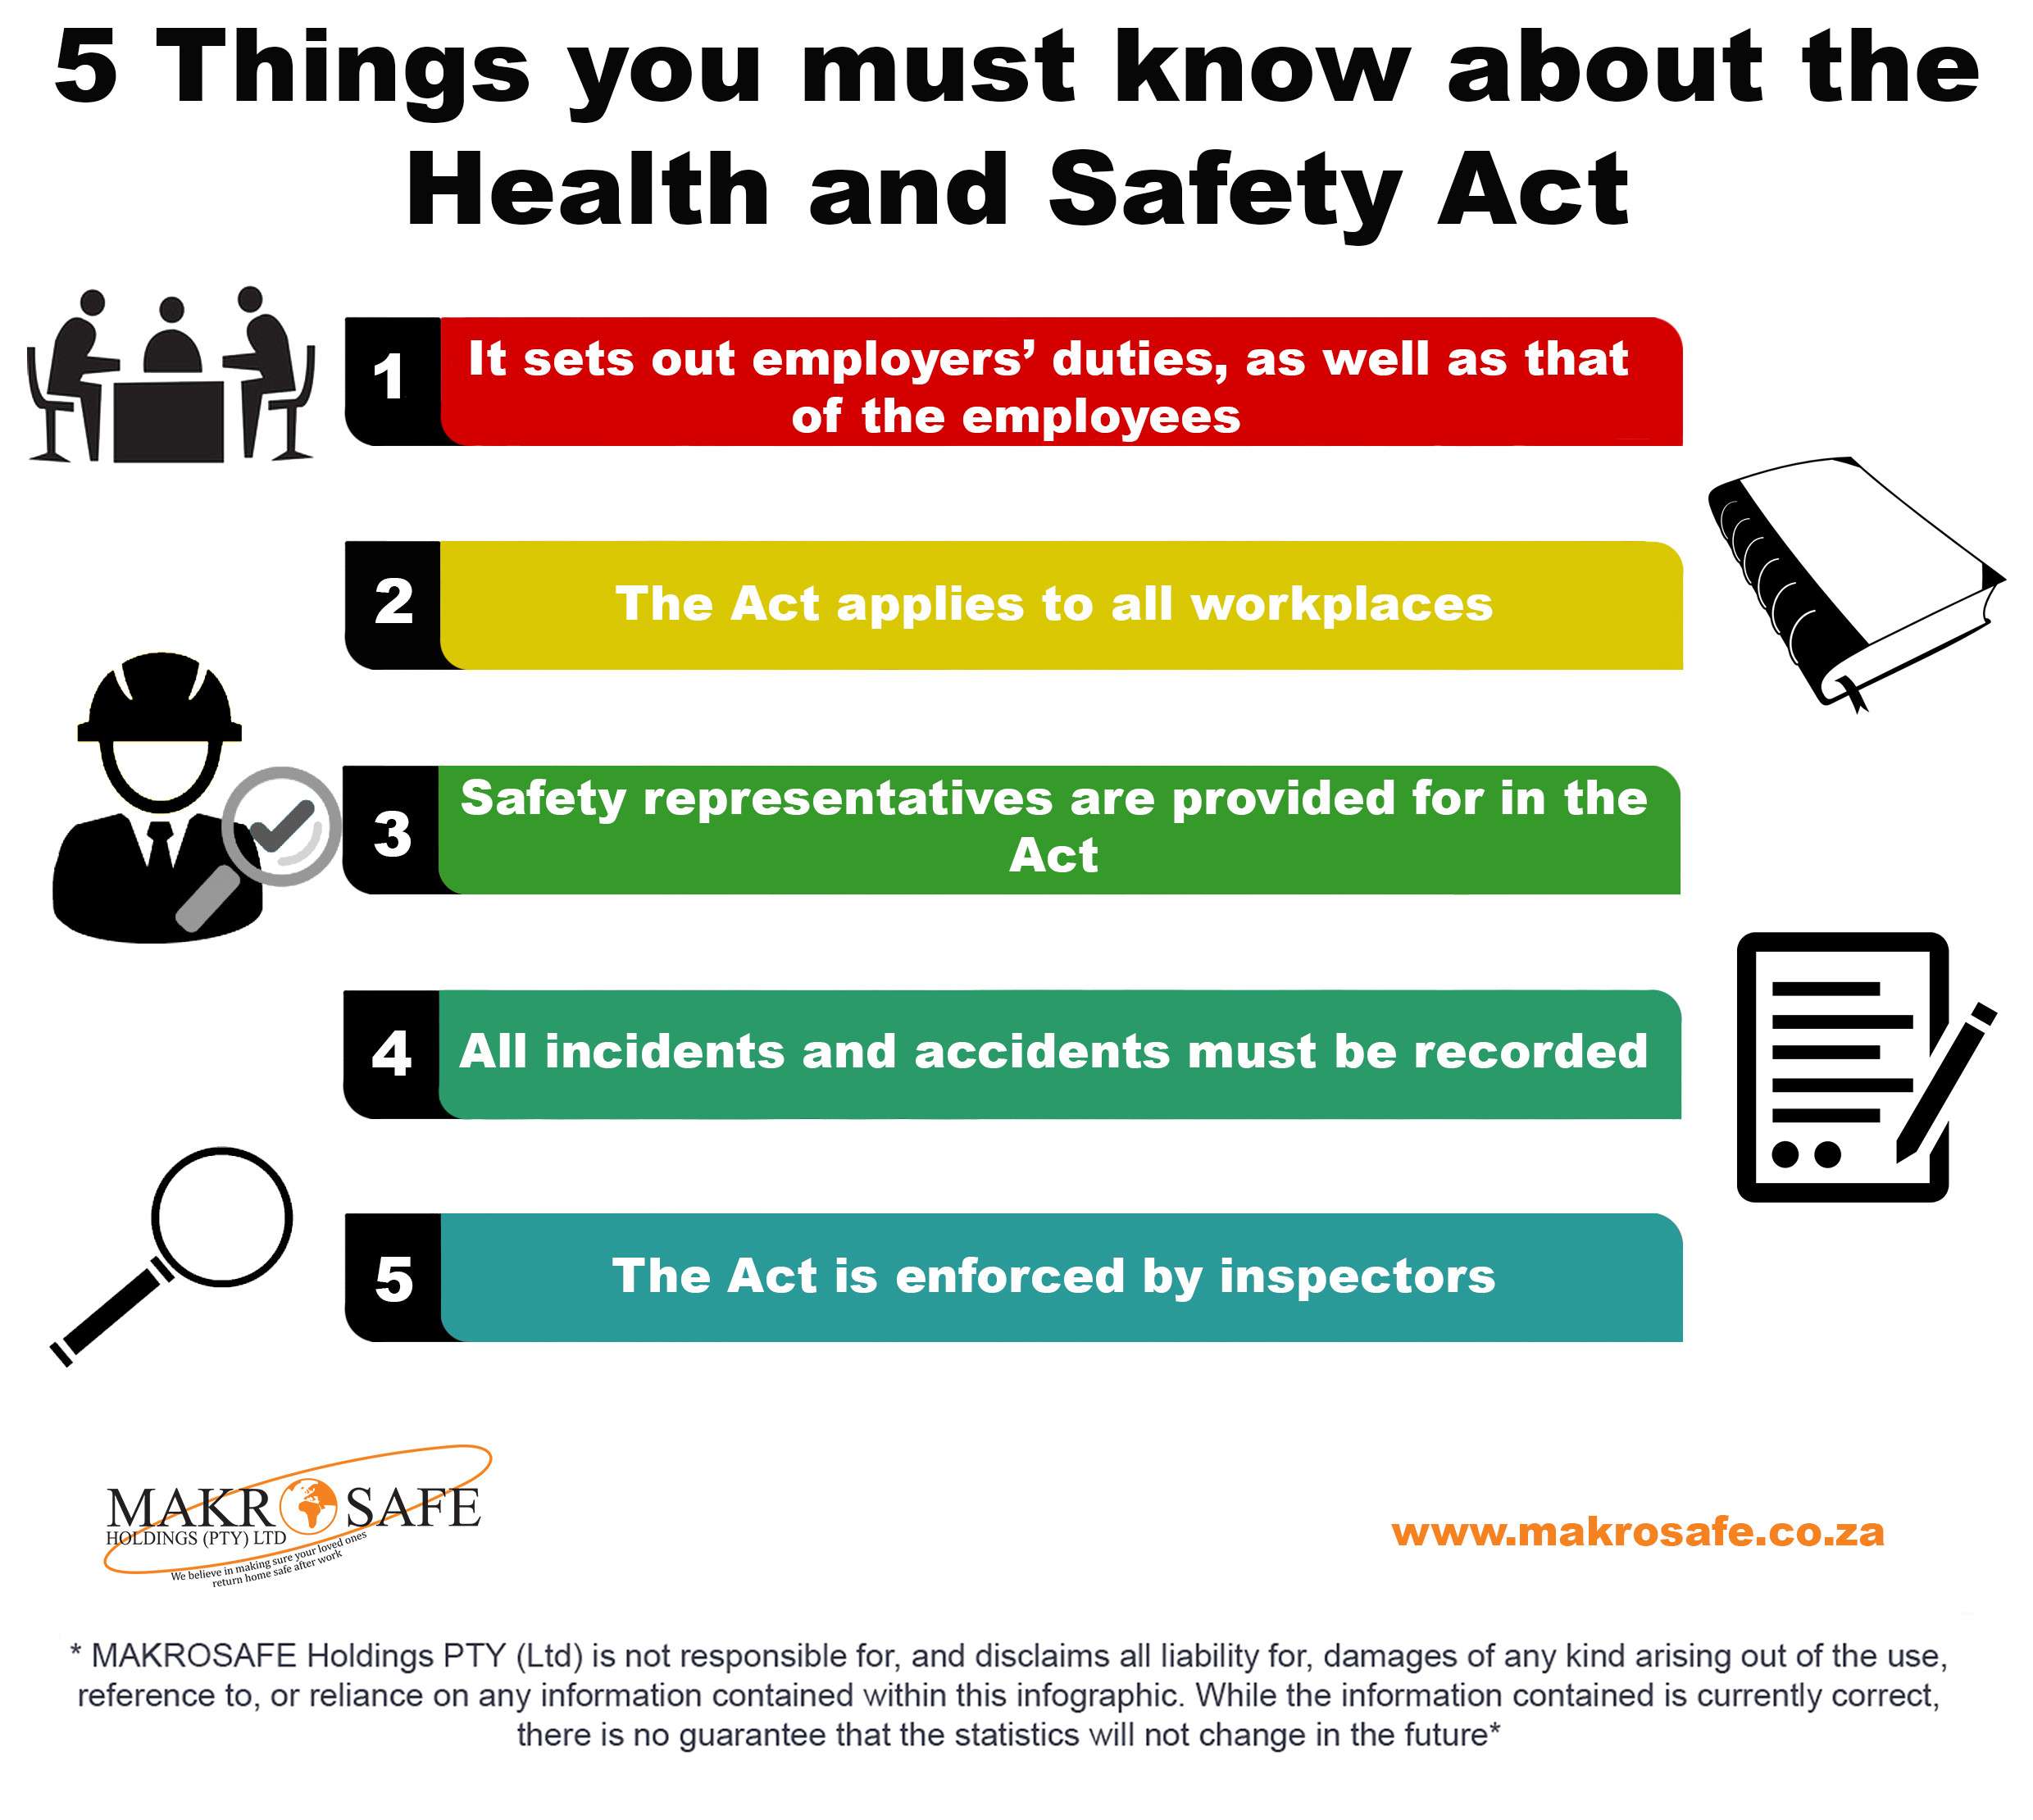 5 things to know about the Health and Safety Act